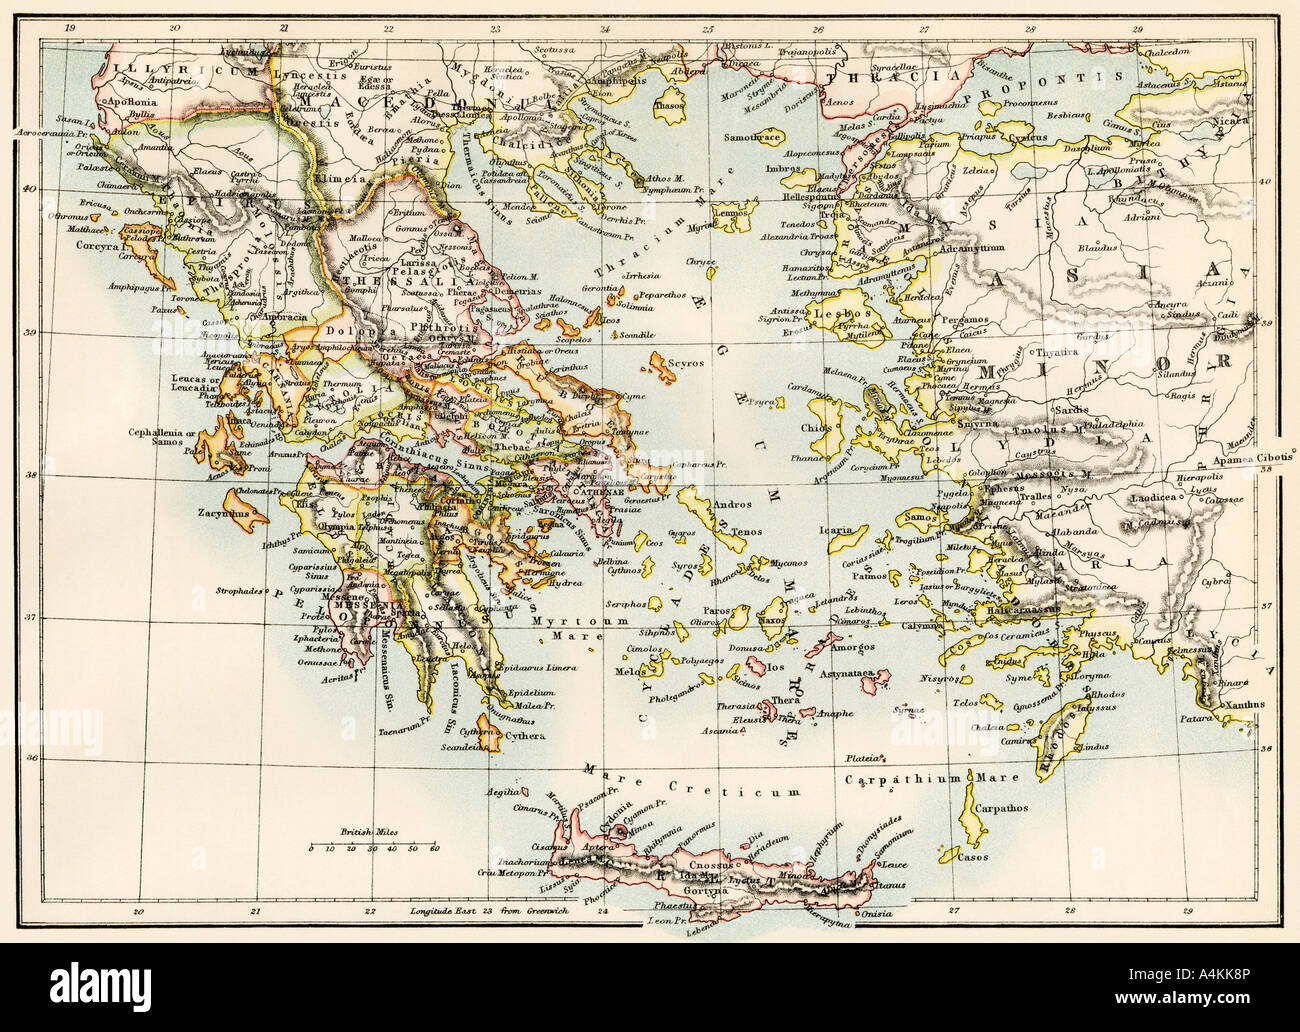 Map Of The Aegean Sea In The Time Of Ancient Greece Color Lithograph A4KK8P 